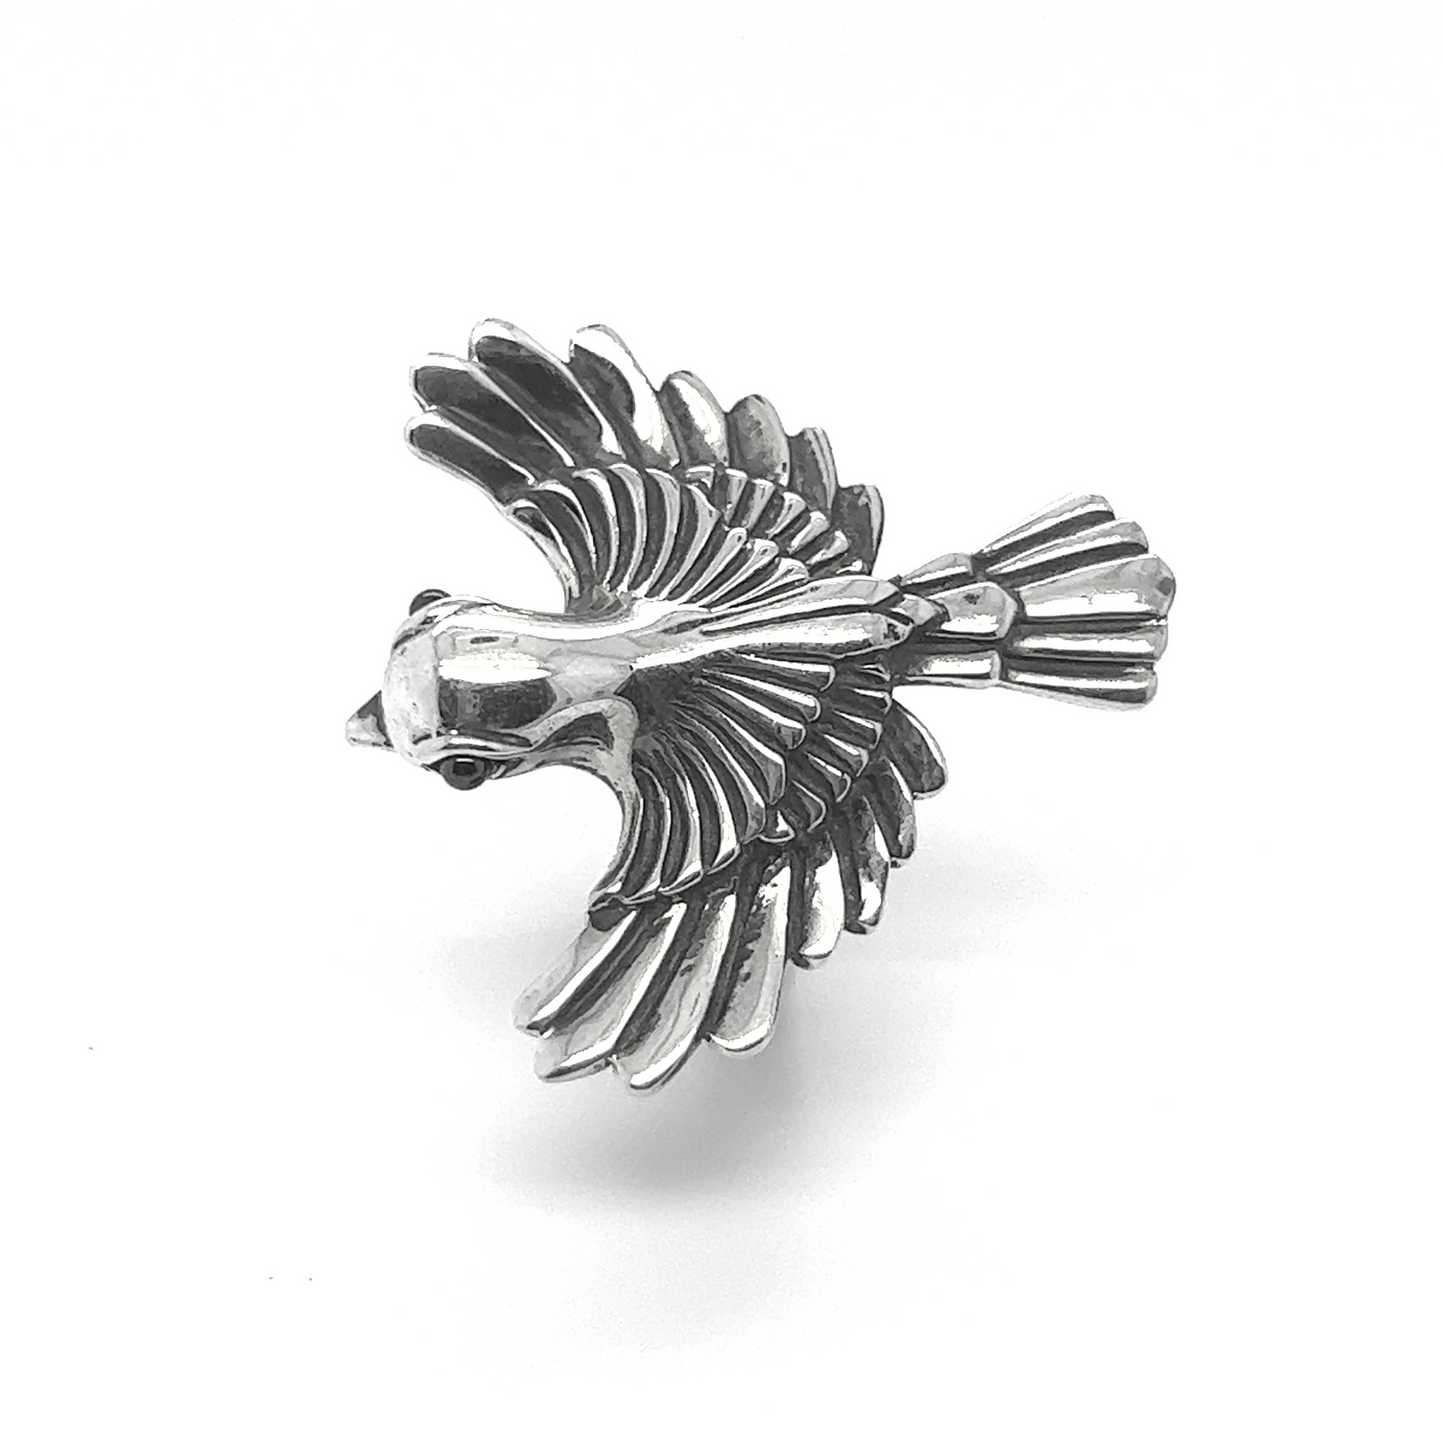 A designer Statement Sparrow Ring on a white background.